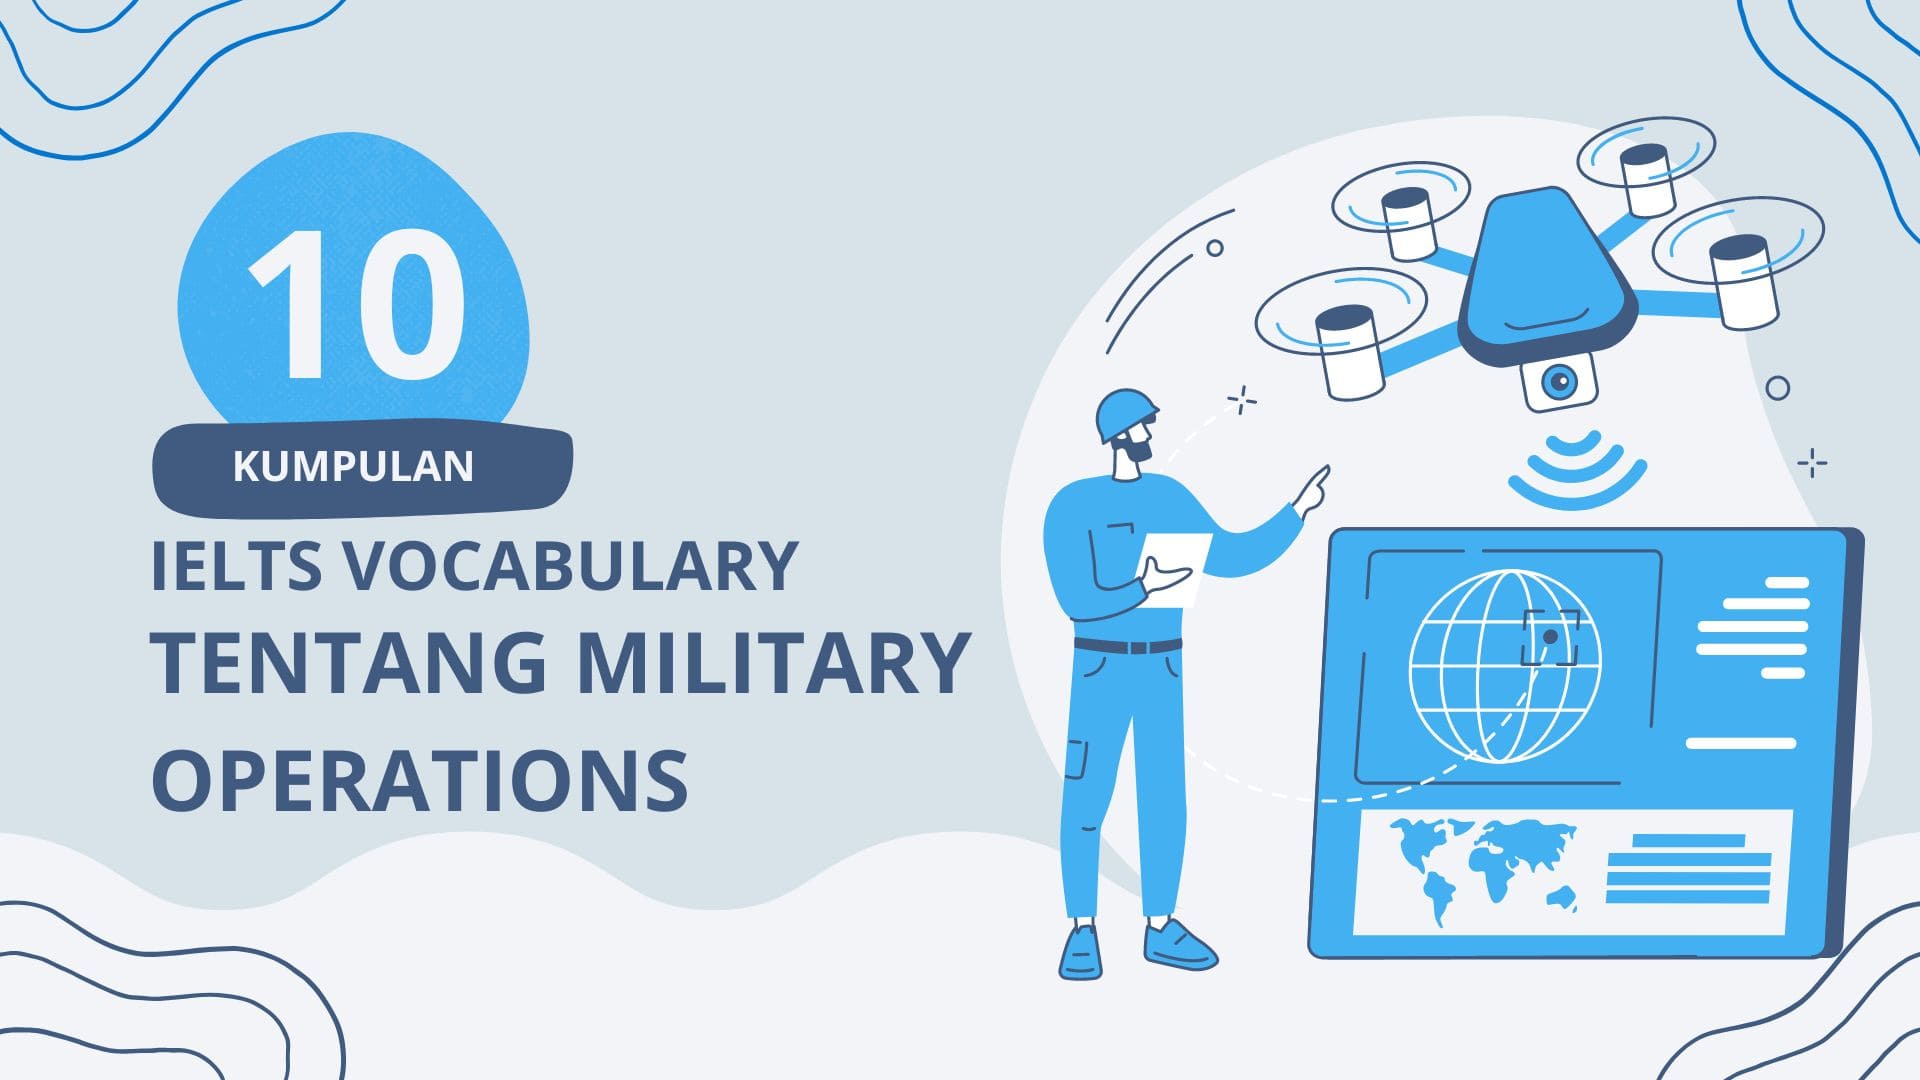 IELTS VOCABULARY tentang MILITARY OPERATIONS